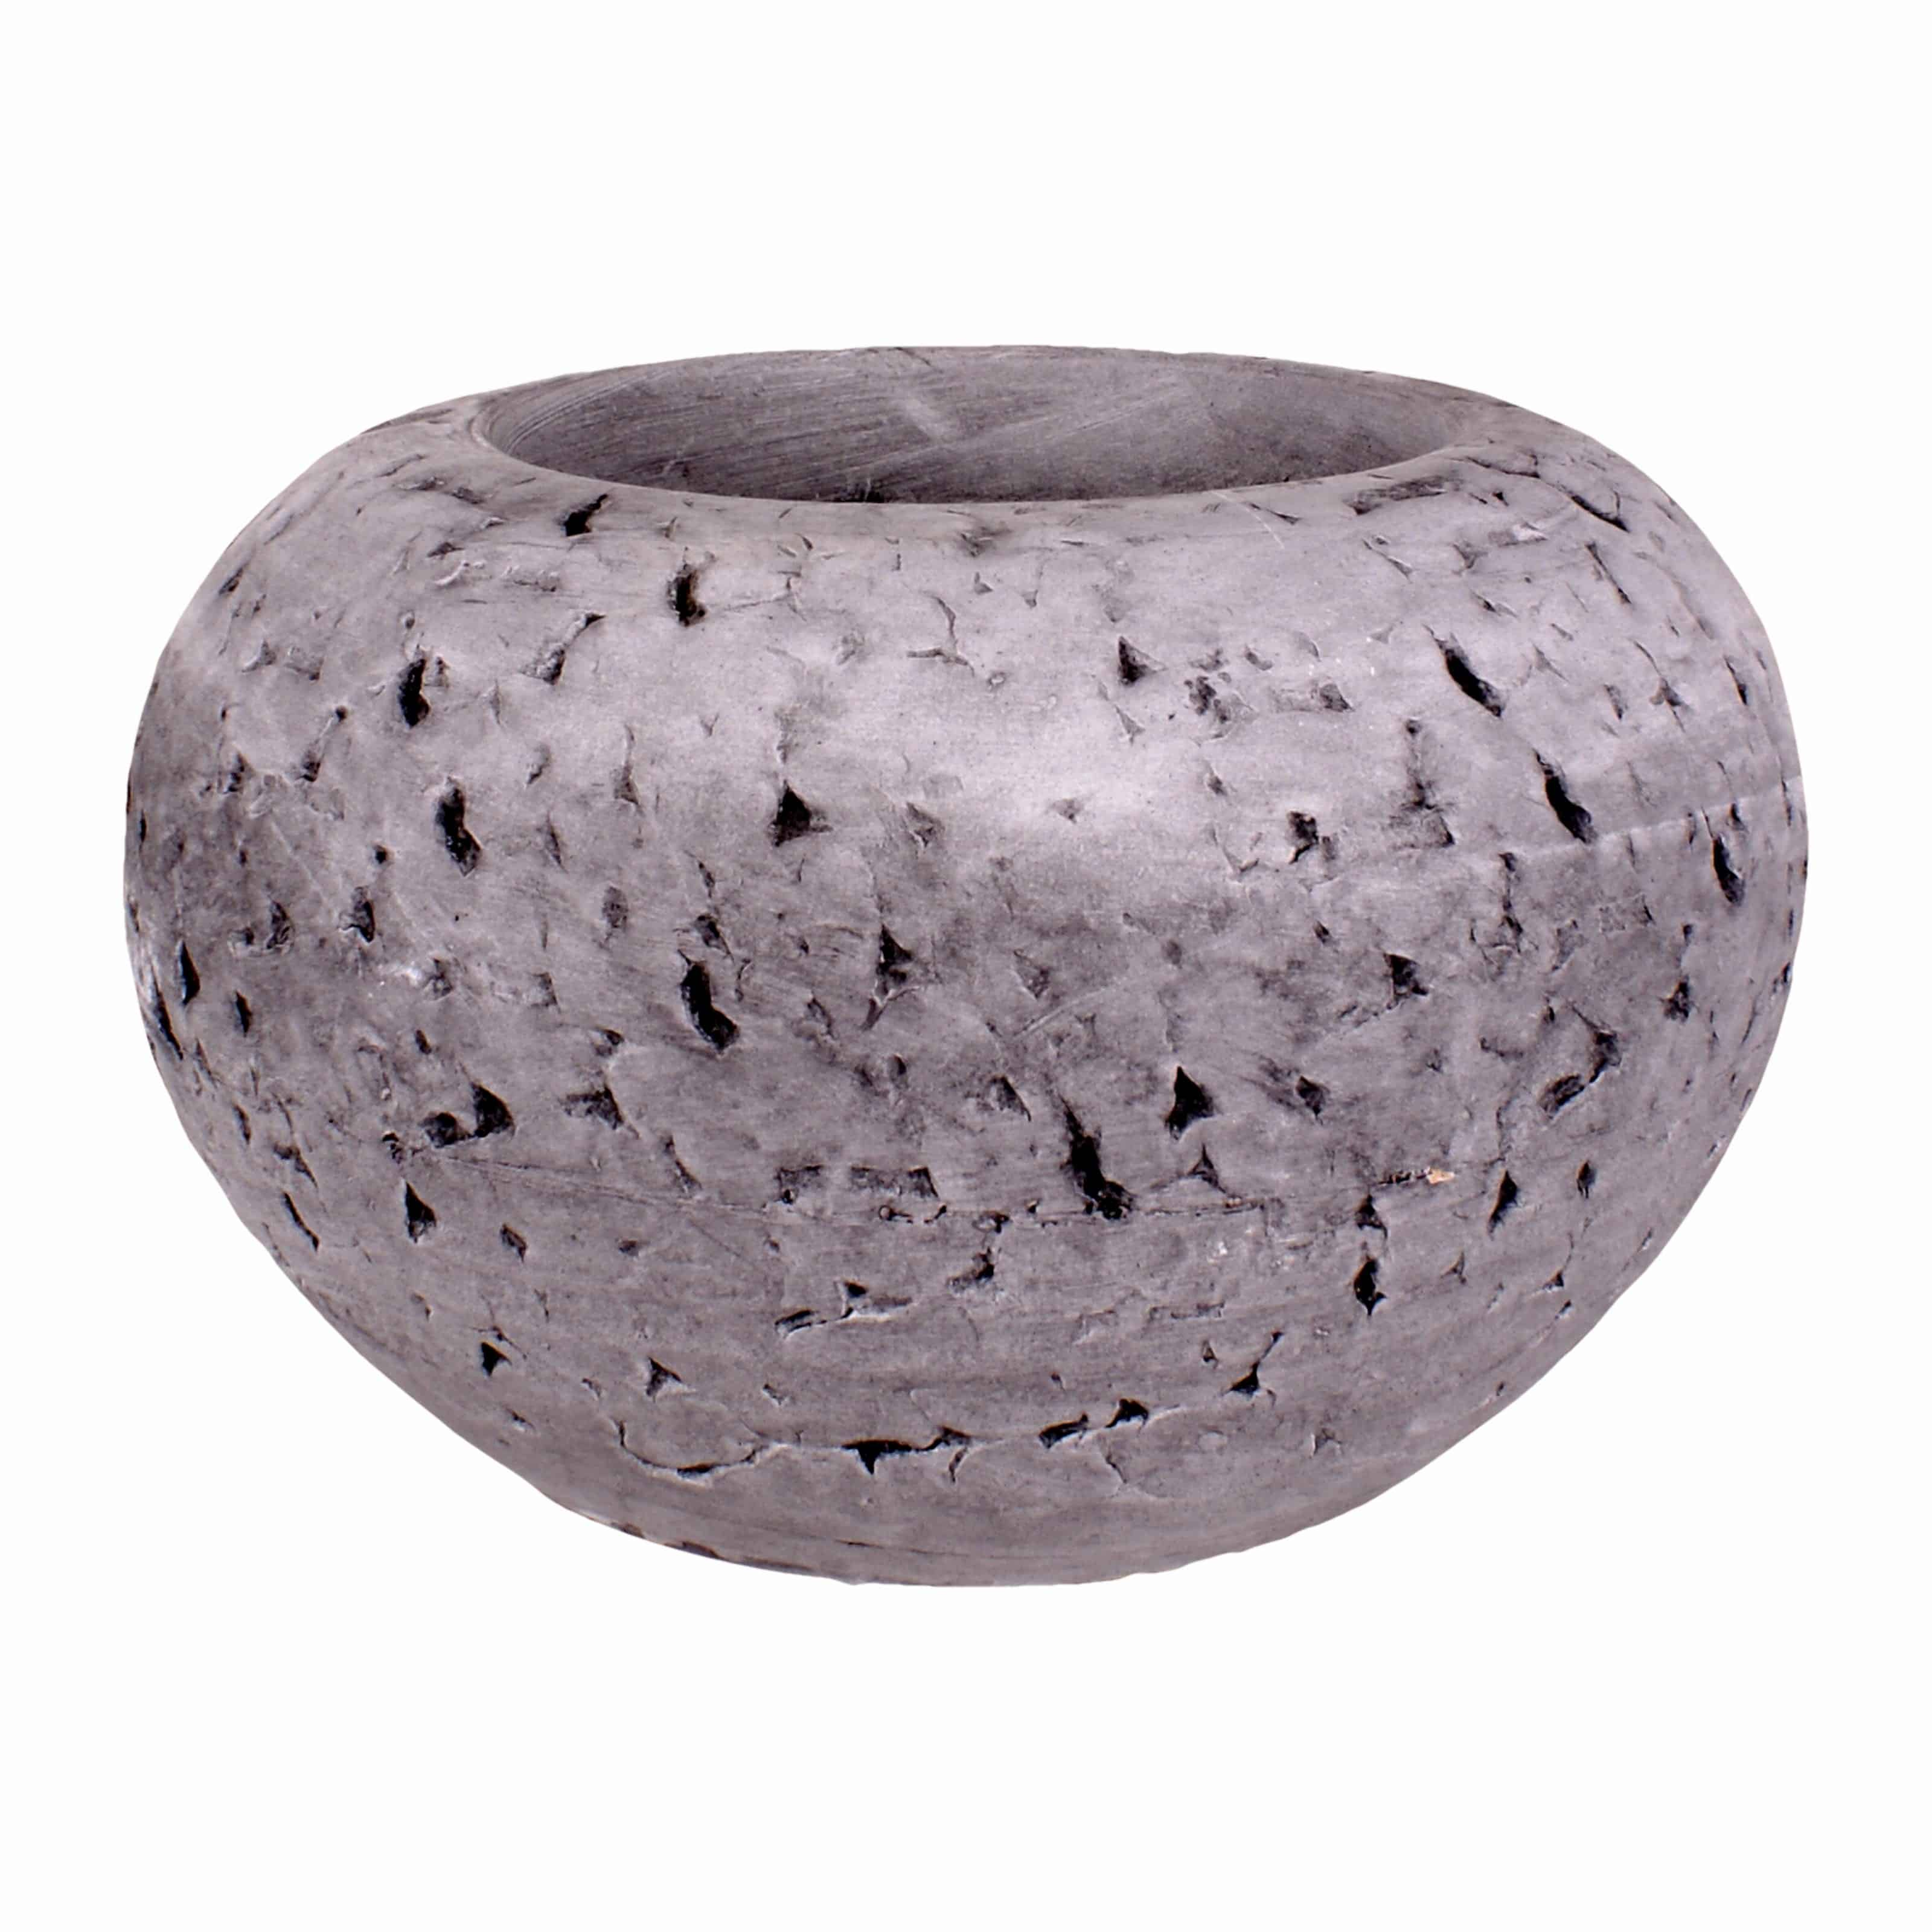 Buy our hand made unique design light grey cranium planter pot. A modern style with interesting grooves to add a chic touch to your flowers and plants.